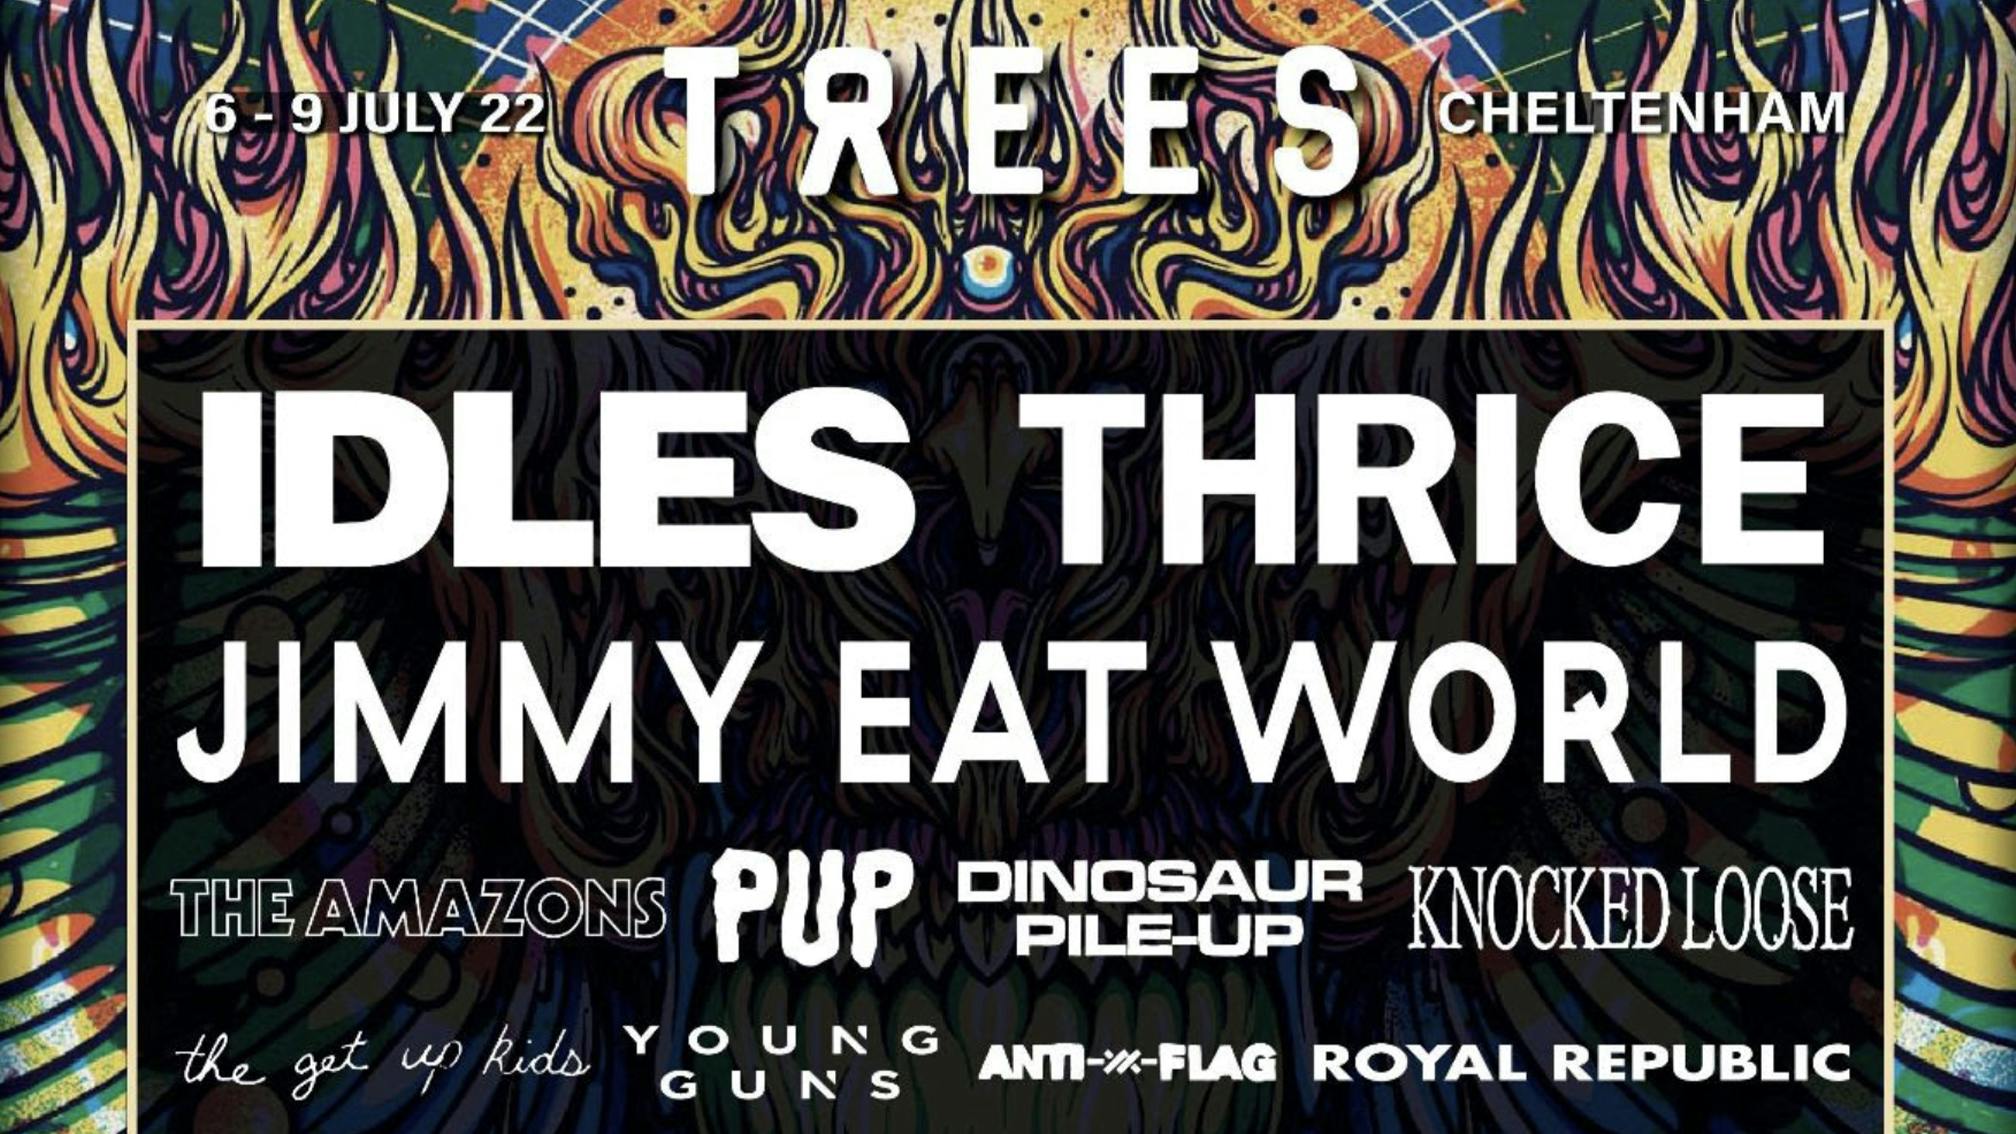 2000trees add more bands including new headliners IDLES